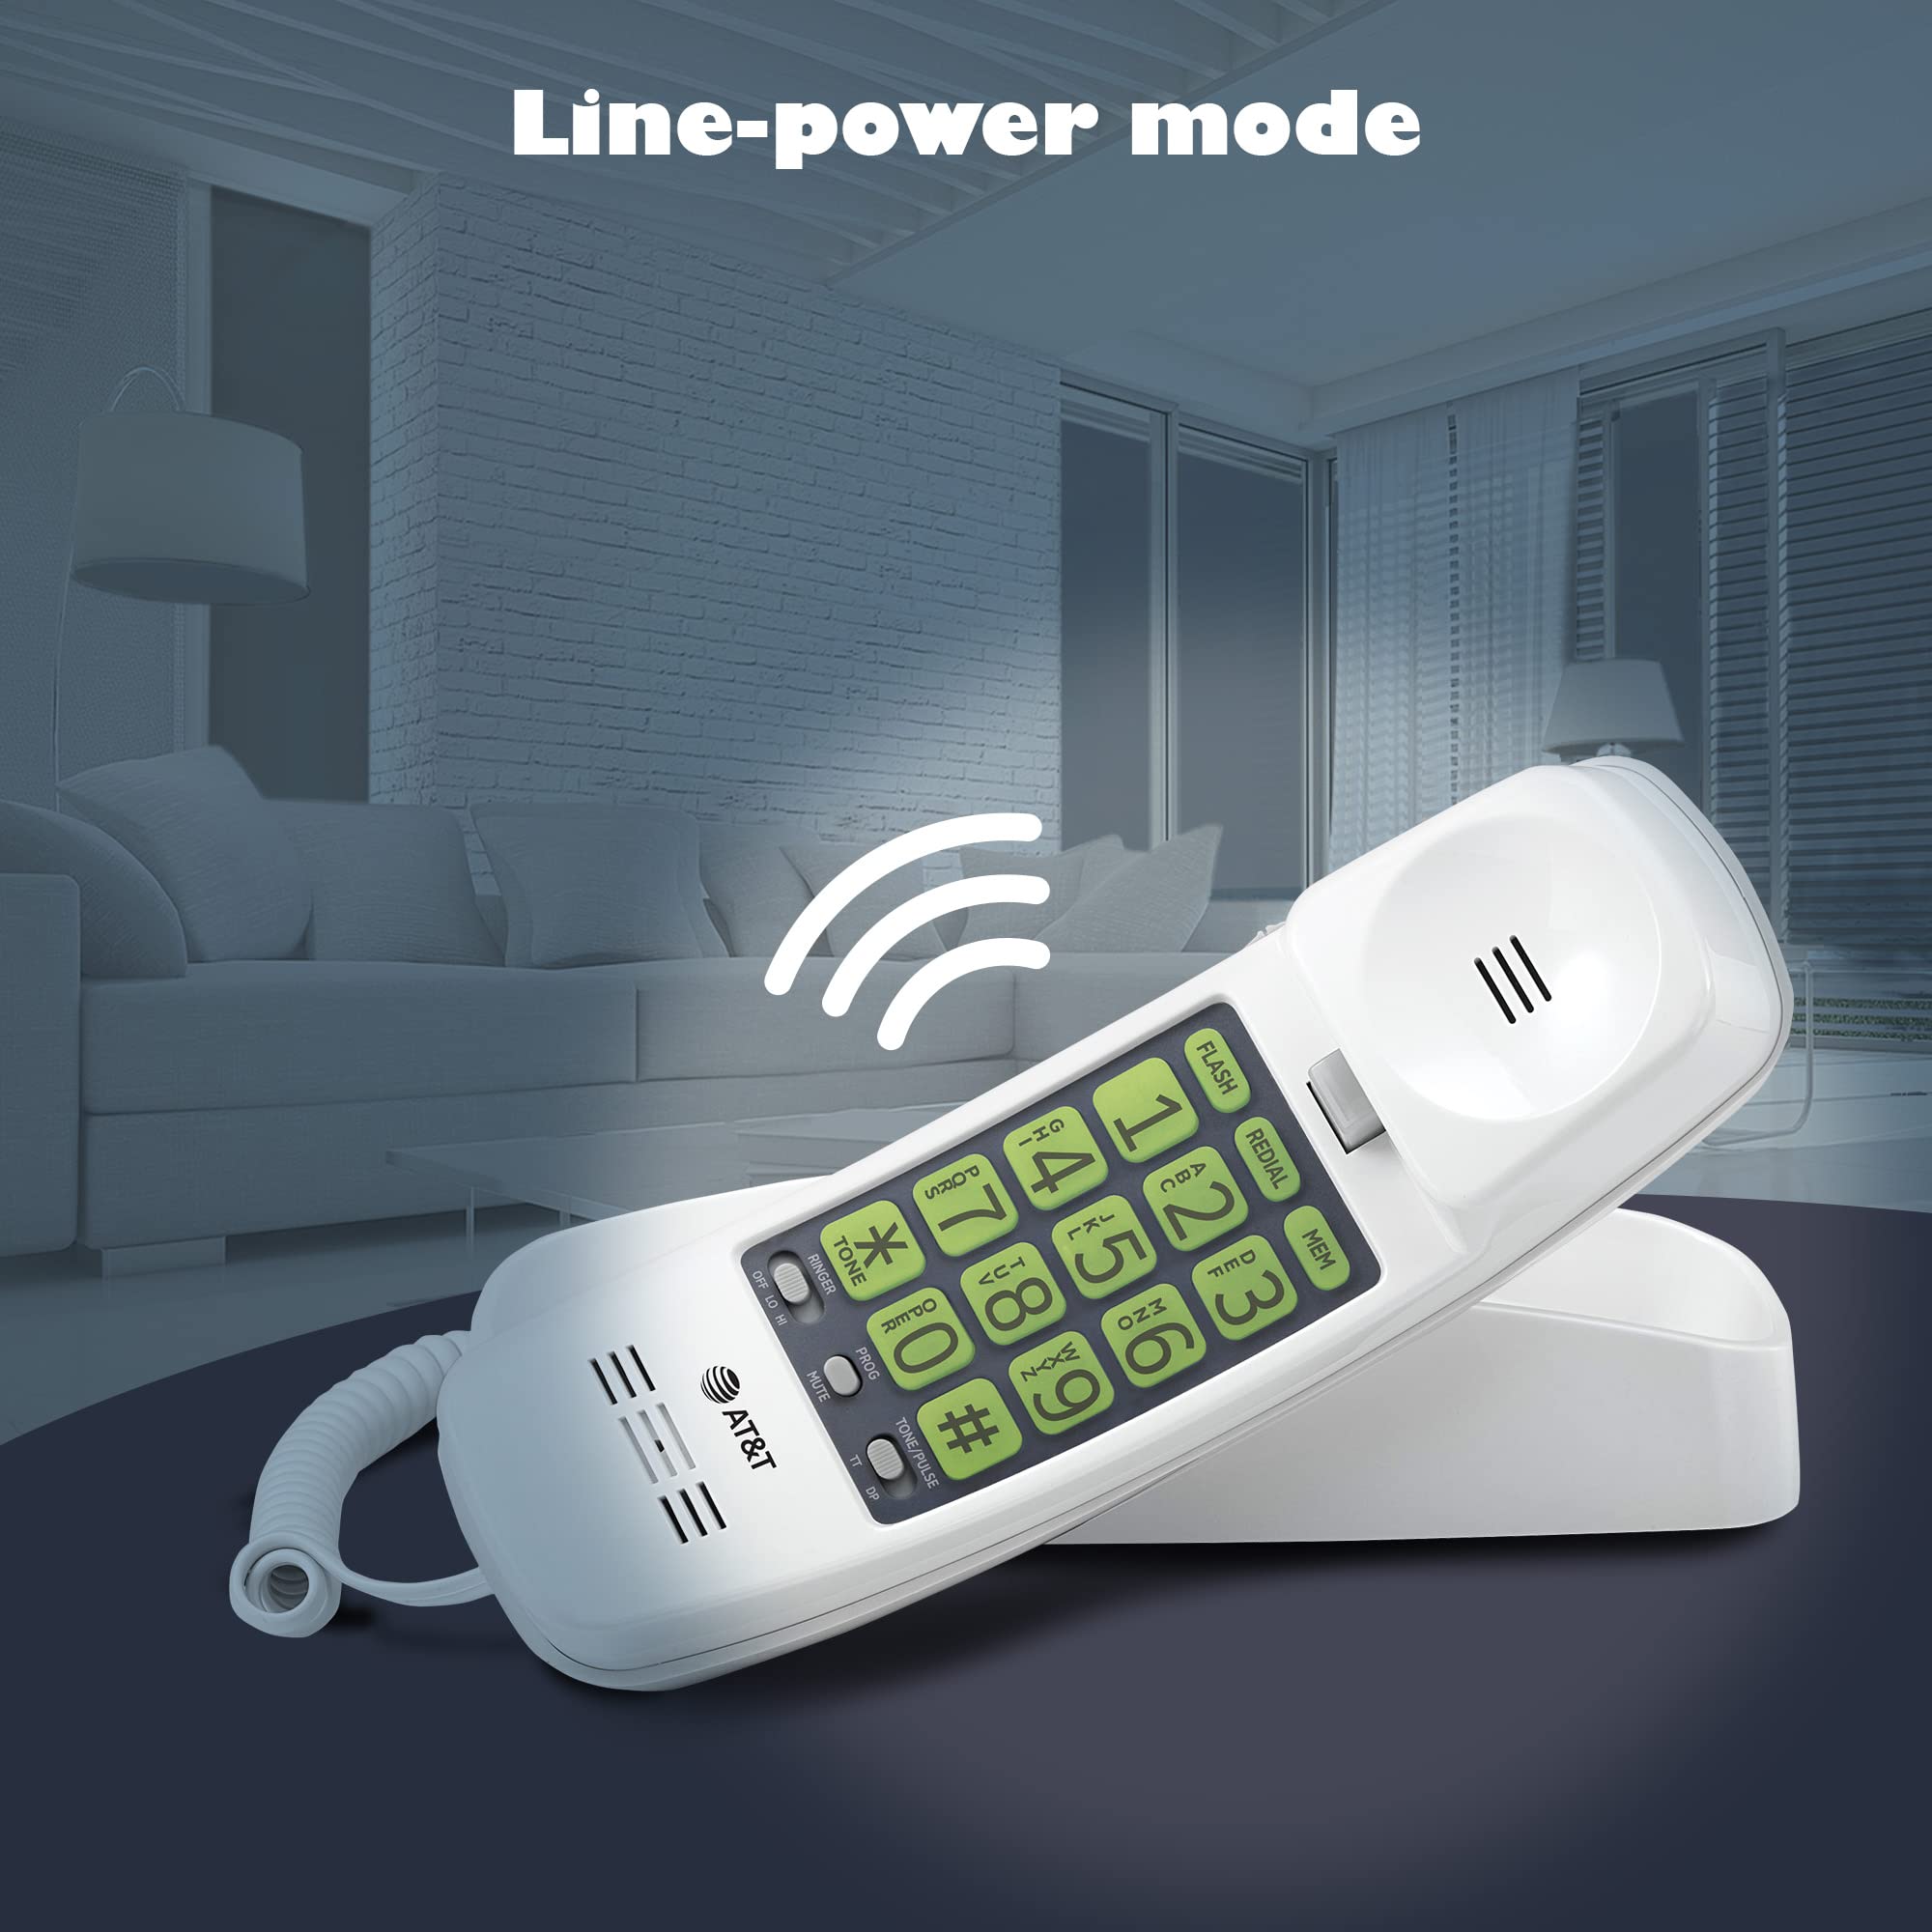 AT&T TRIMLINE 213 Corded Home Phone with Extra Big Buttons & Visual Ringer. No AC Power Required, Improved Easy-Wall-Mount, Lighted Keypad, 10 Speed Dial Keys, Volume Control, Senior Friendly. White